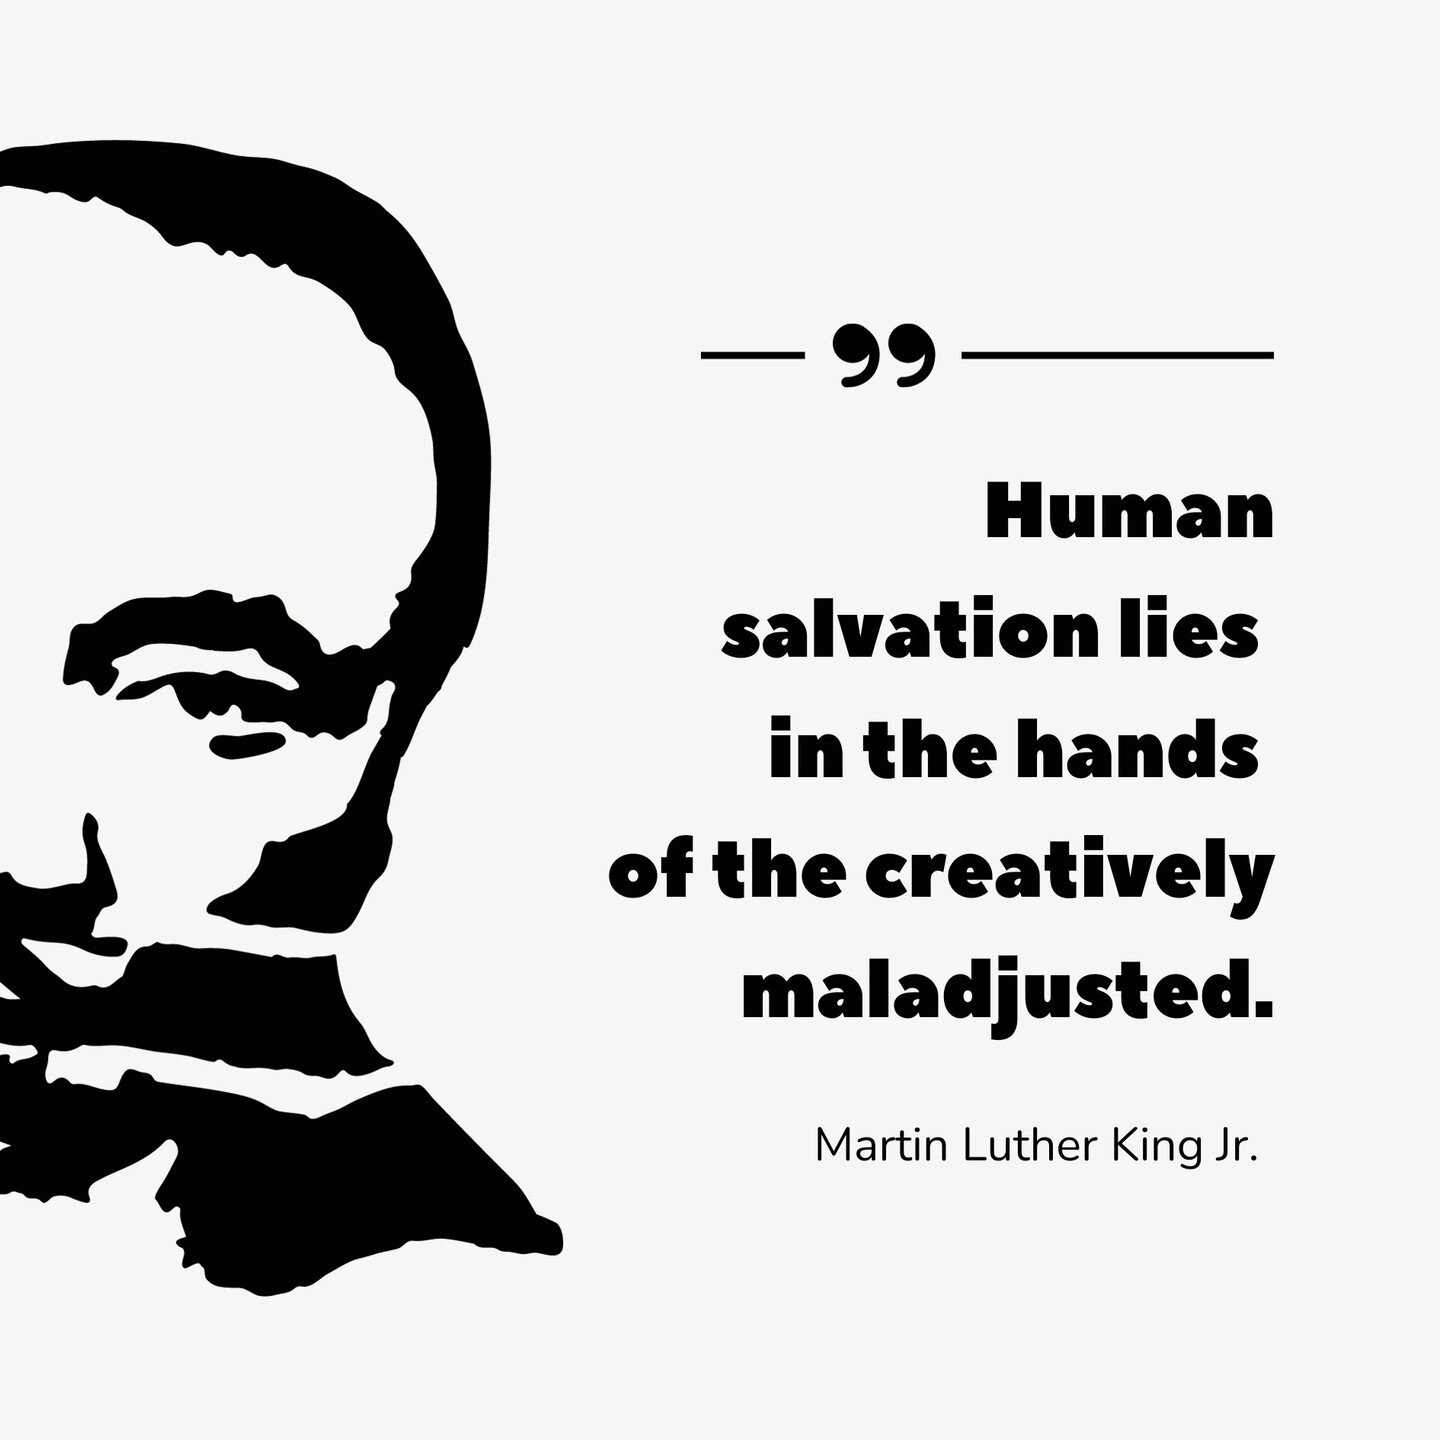 &quot;Human salvation lies in the hands of the creatively maladjusted.&quot; 🌟 These profound words by Martin Luther King Jr. remind us that true freedom can be found in those who dare to creatively respond to oppressive and 'normal' social environm